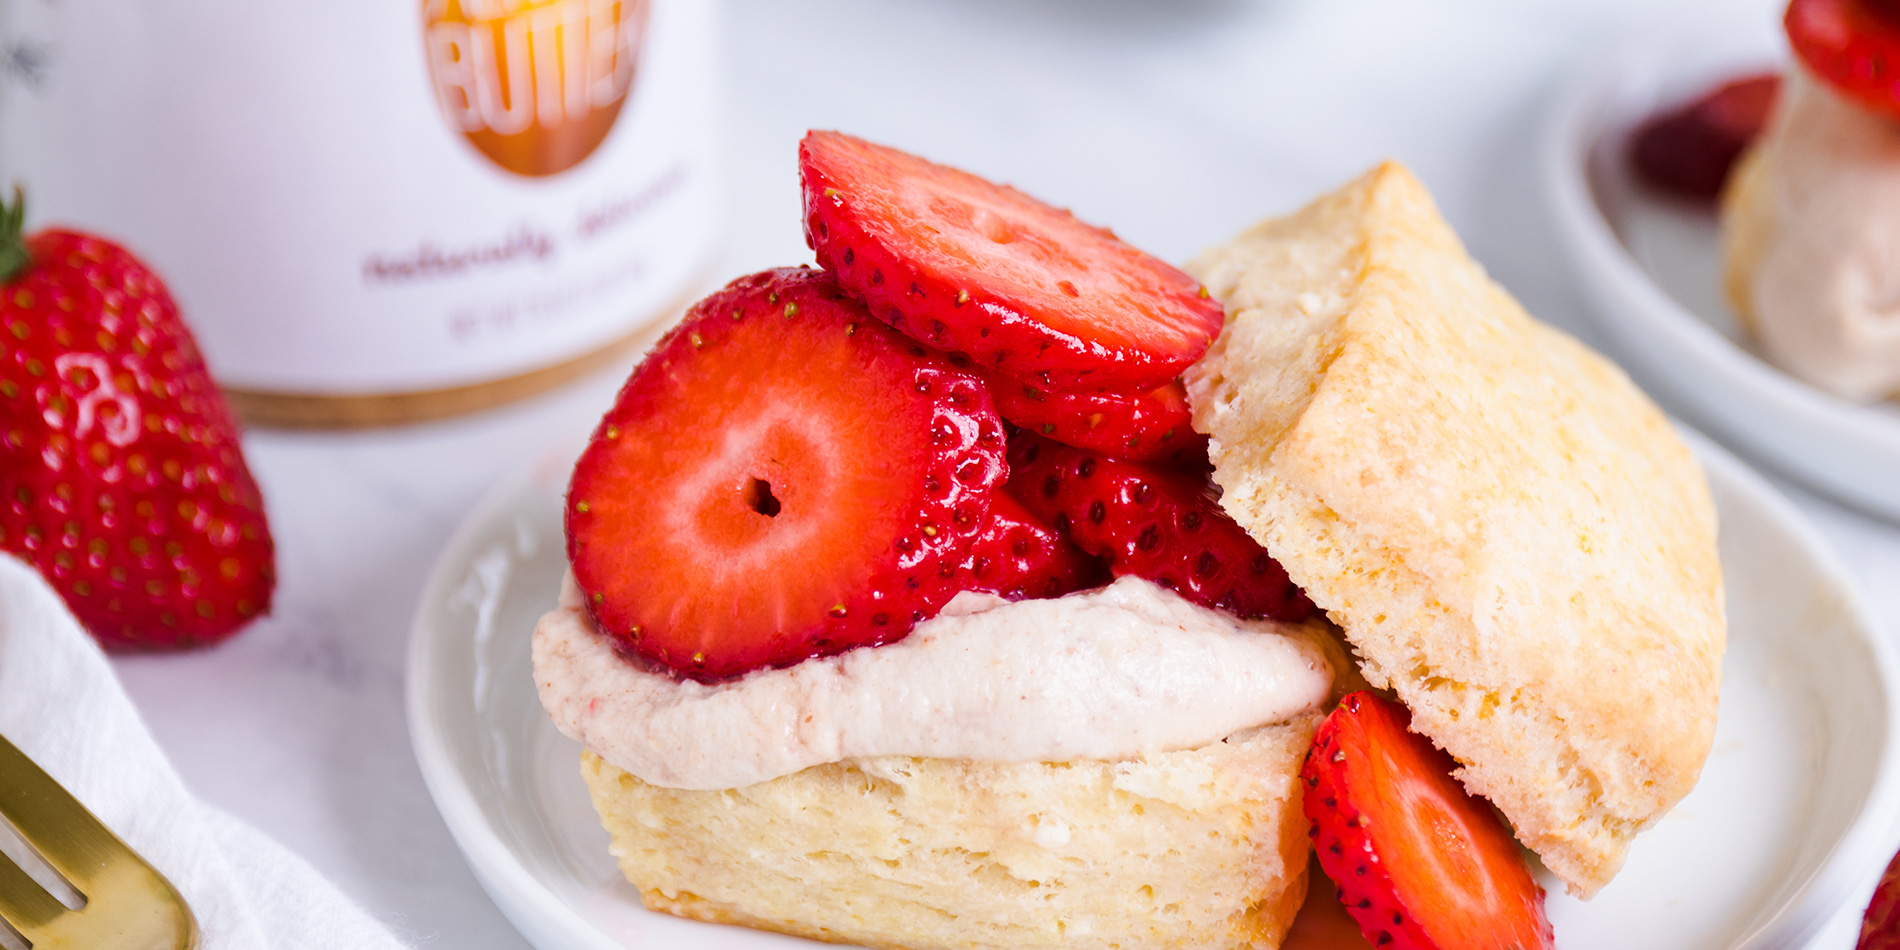 Strawberry Shortcakes stacked atop each other, topped with Dairy-Free Coconut Cream and on a small ceramic plate